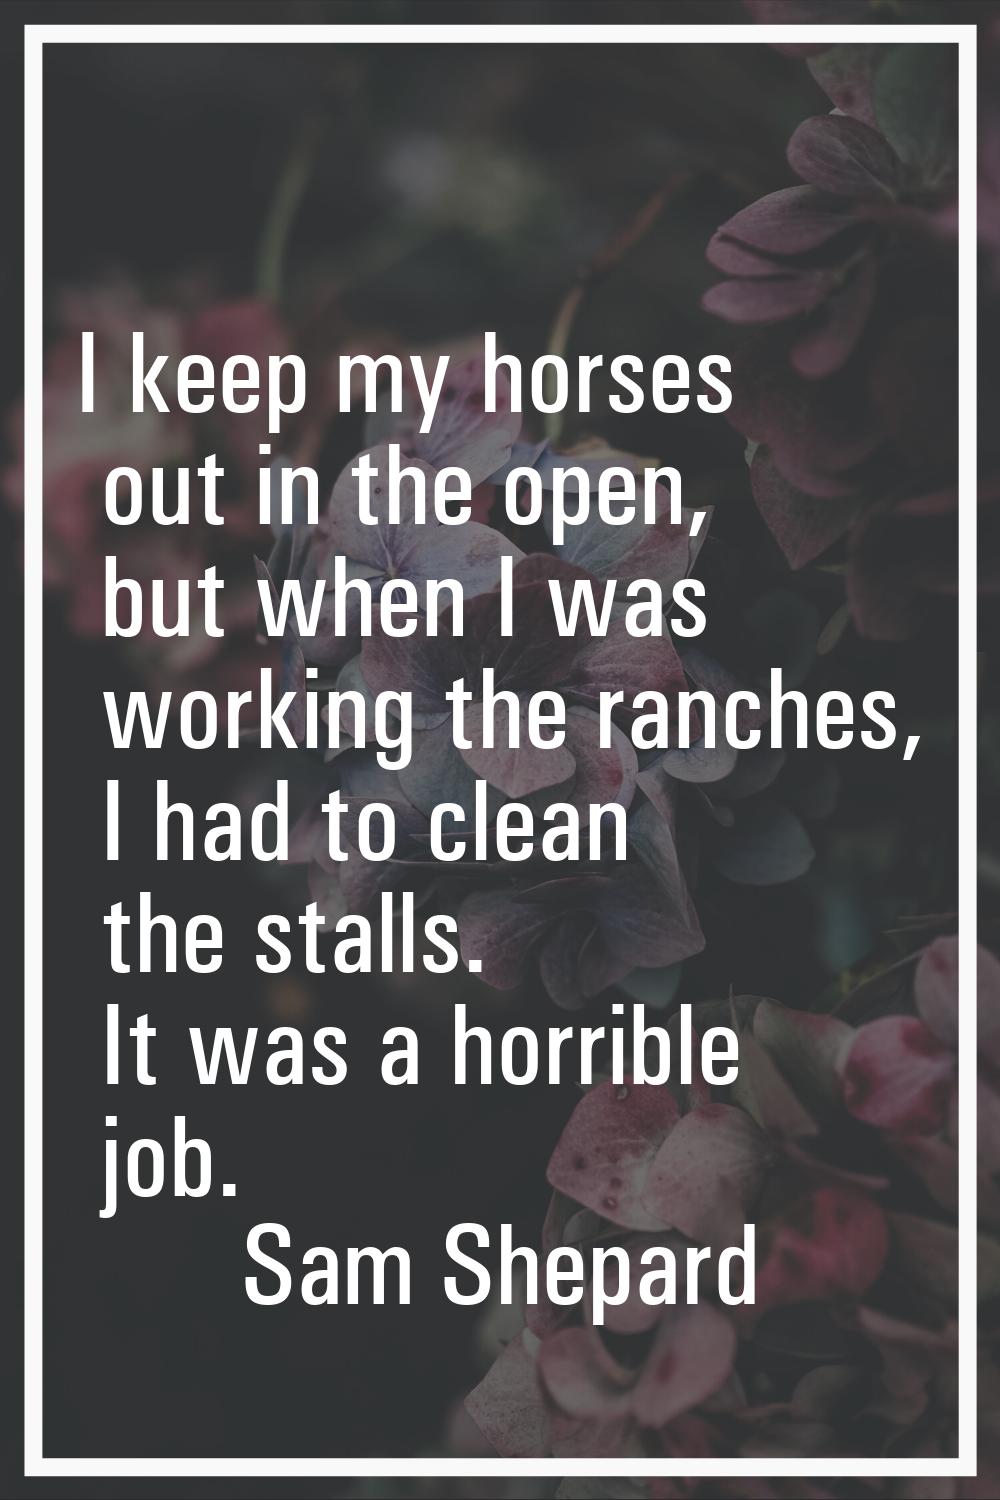 I keep my horses out in the open, but when I was working the ranches, I had to clean the stalls. It